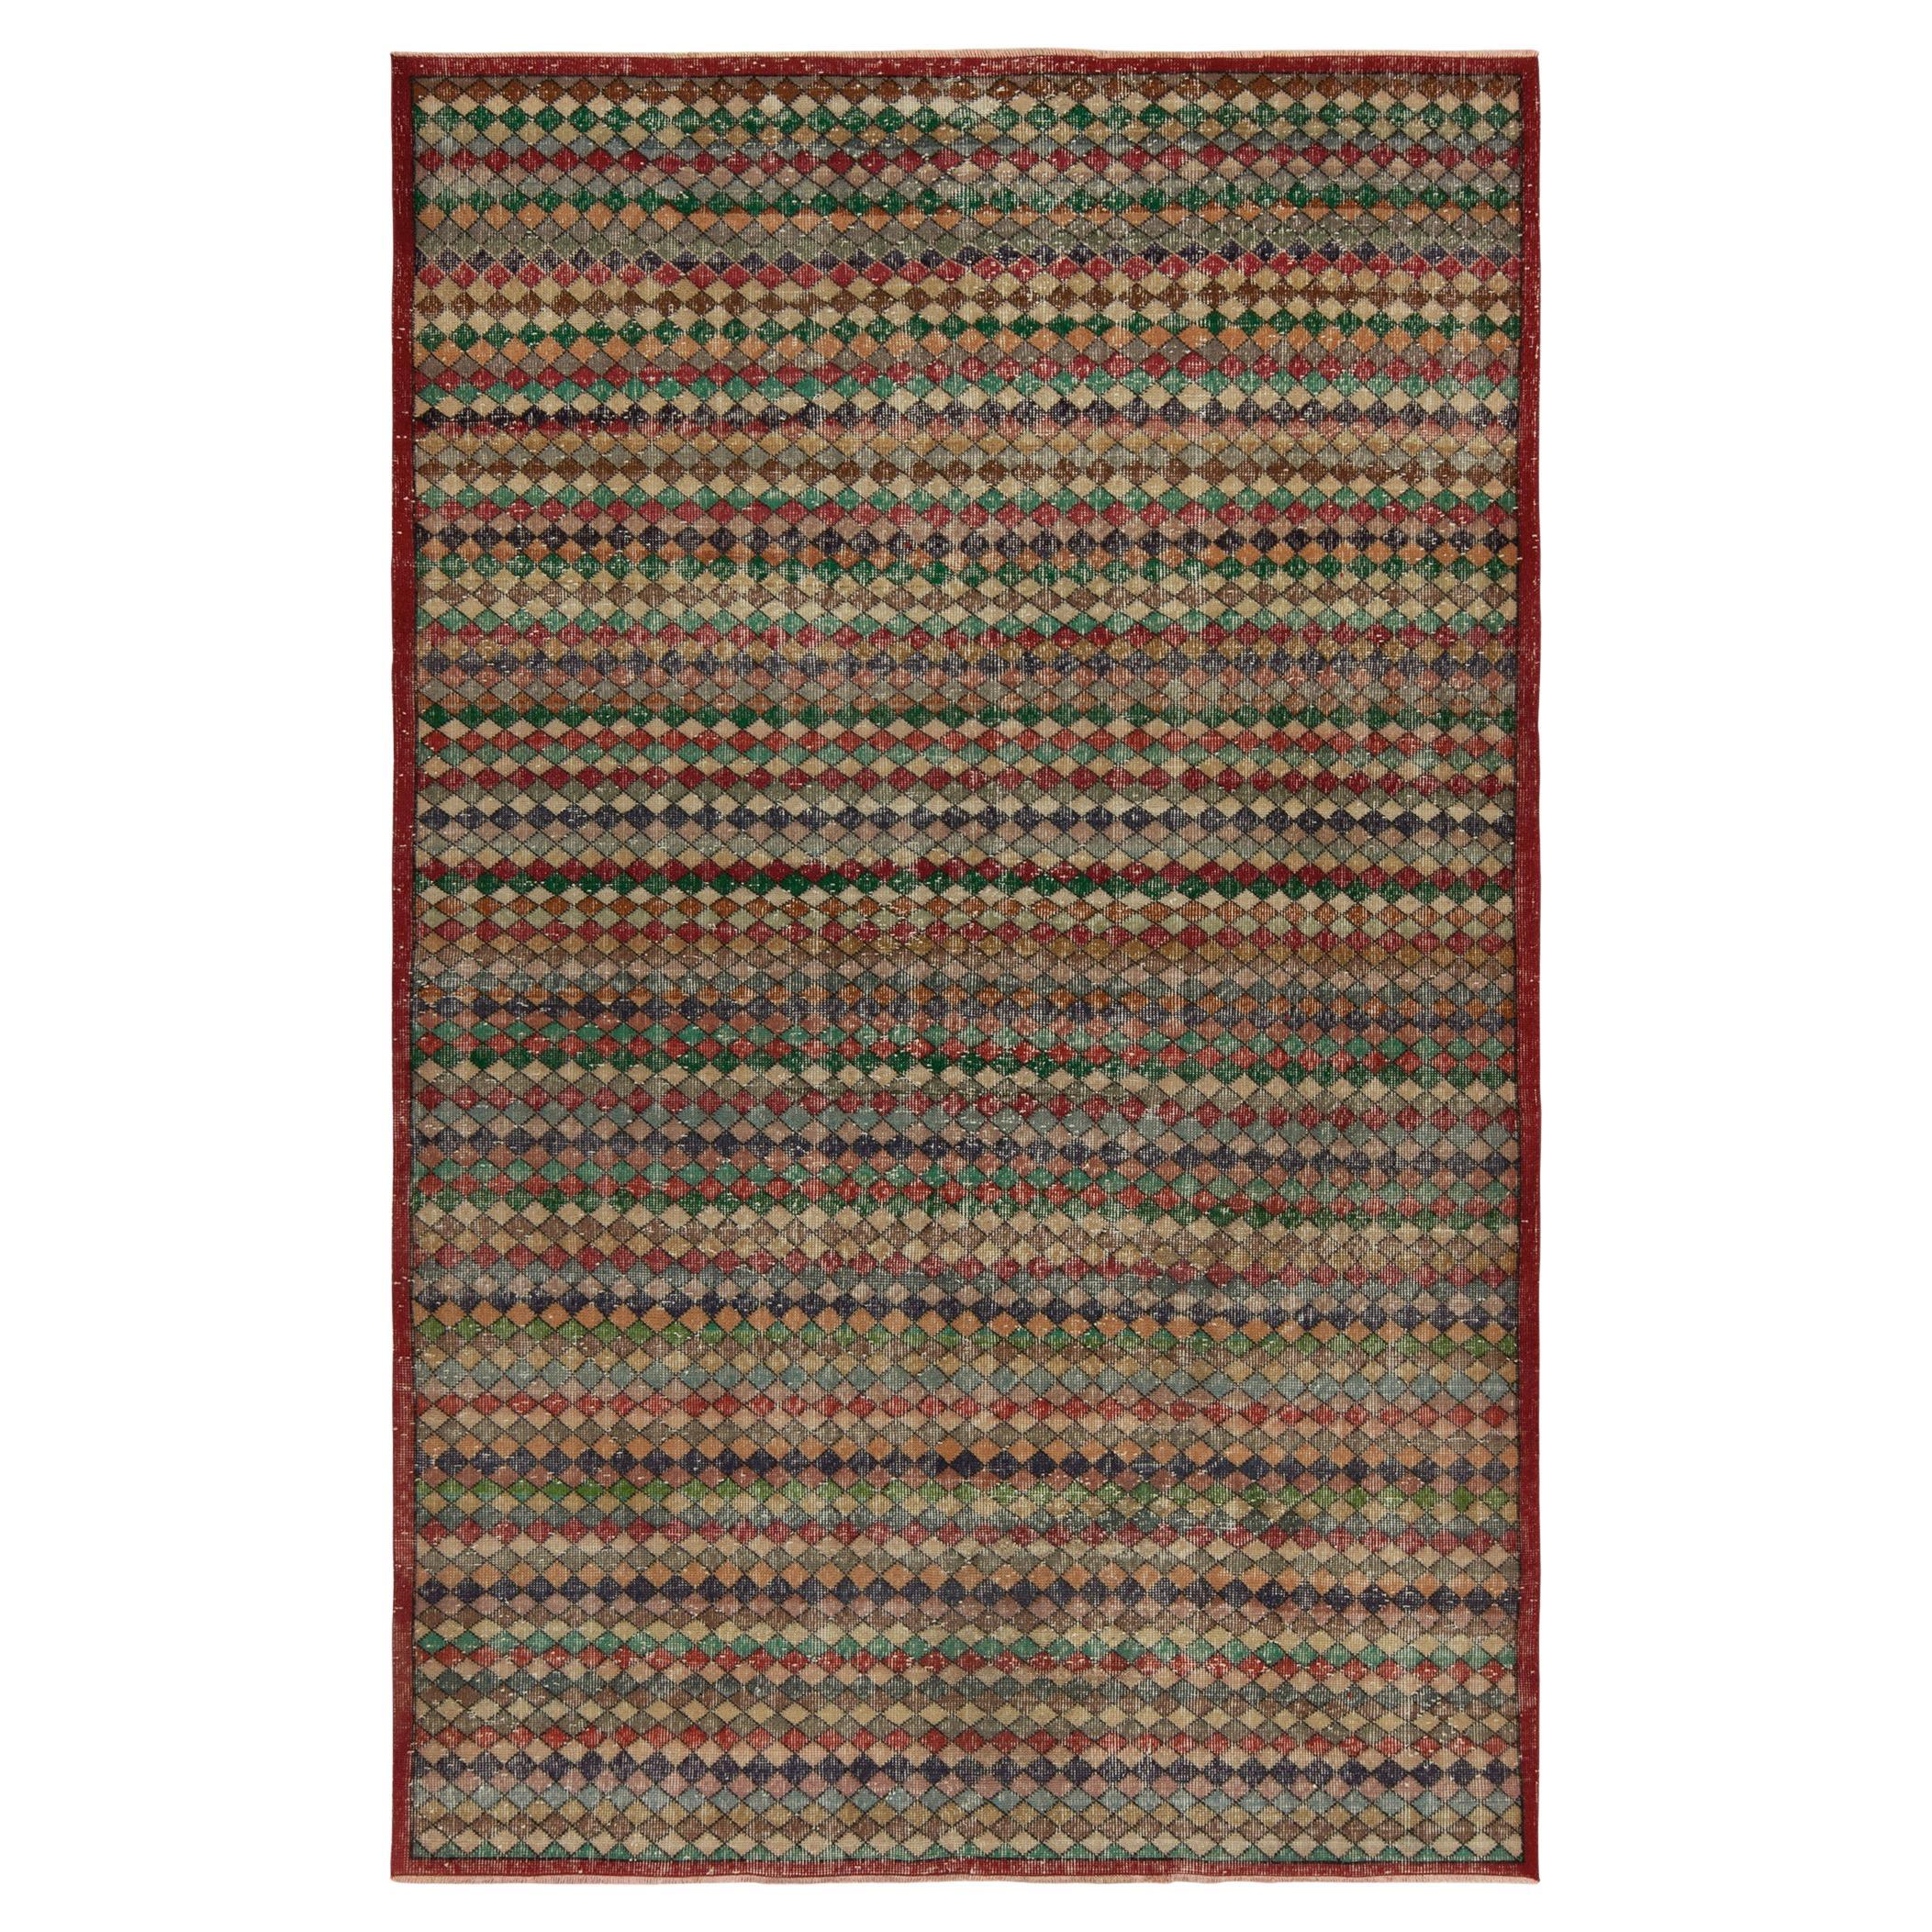 1960s Vintage Art Deco Rug in Multicolor and Geometric Patterns by Rug & Kilim For Sale